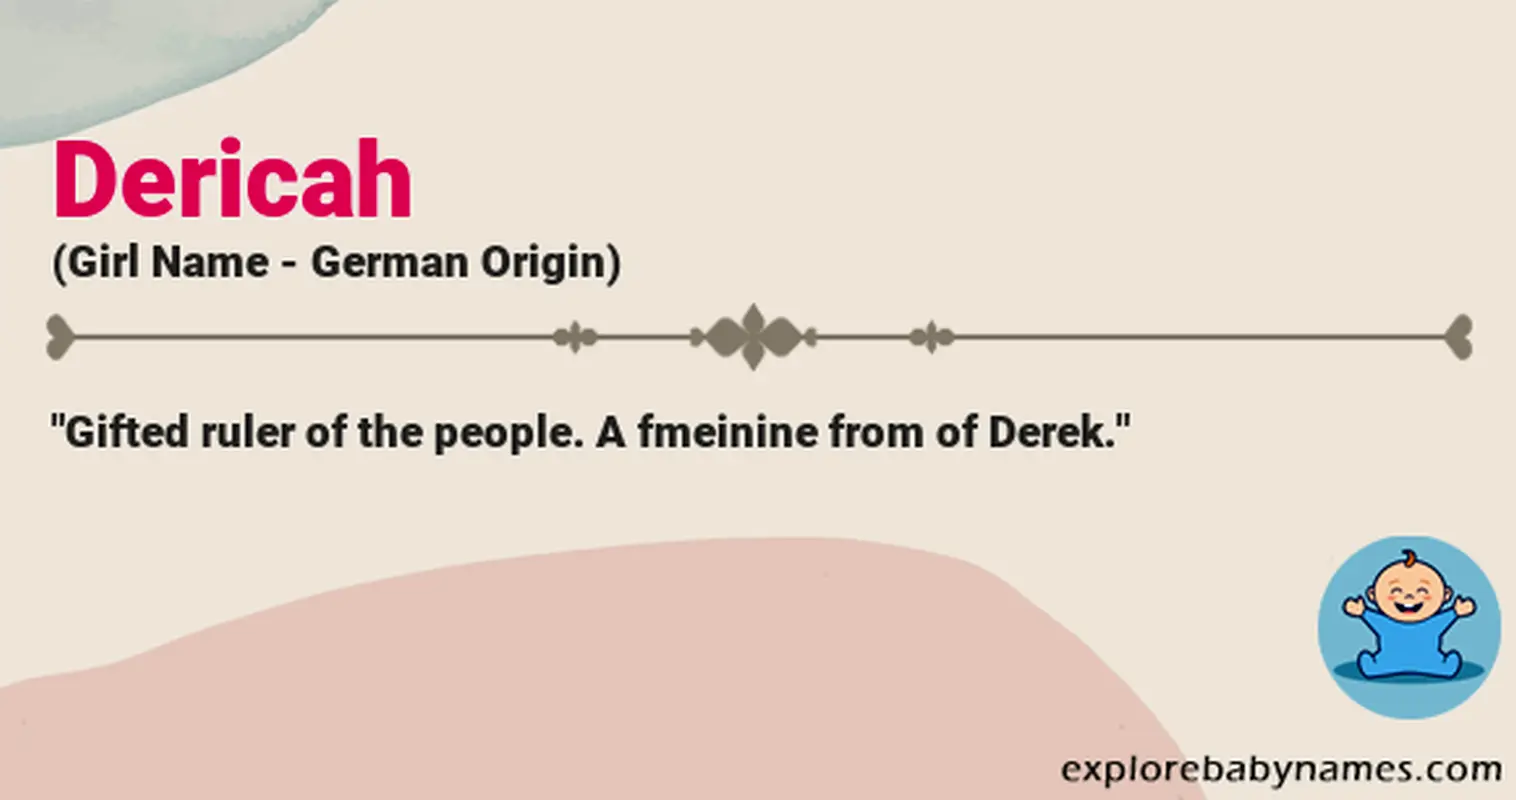 Meaning of Dericah